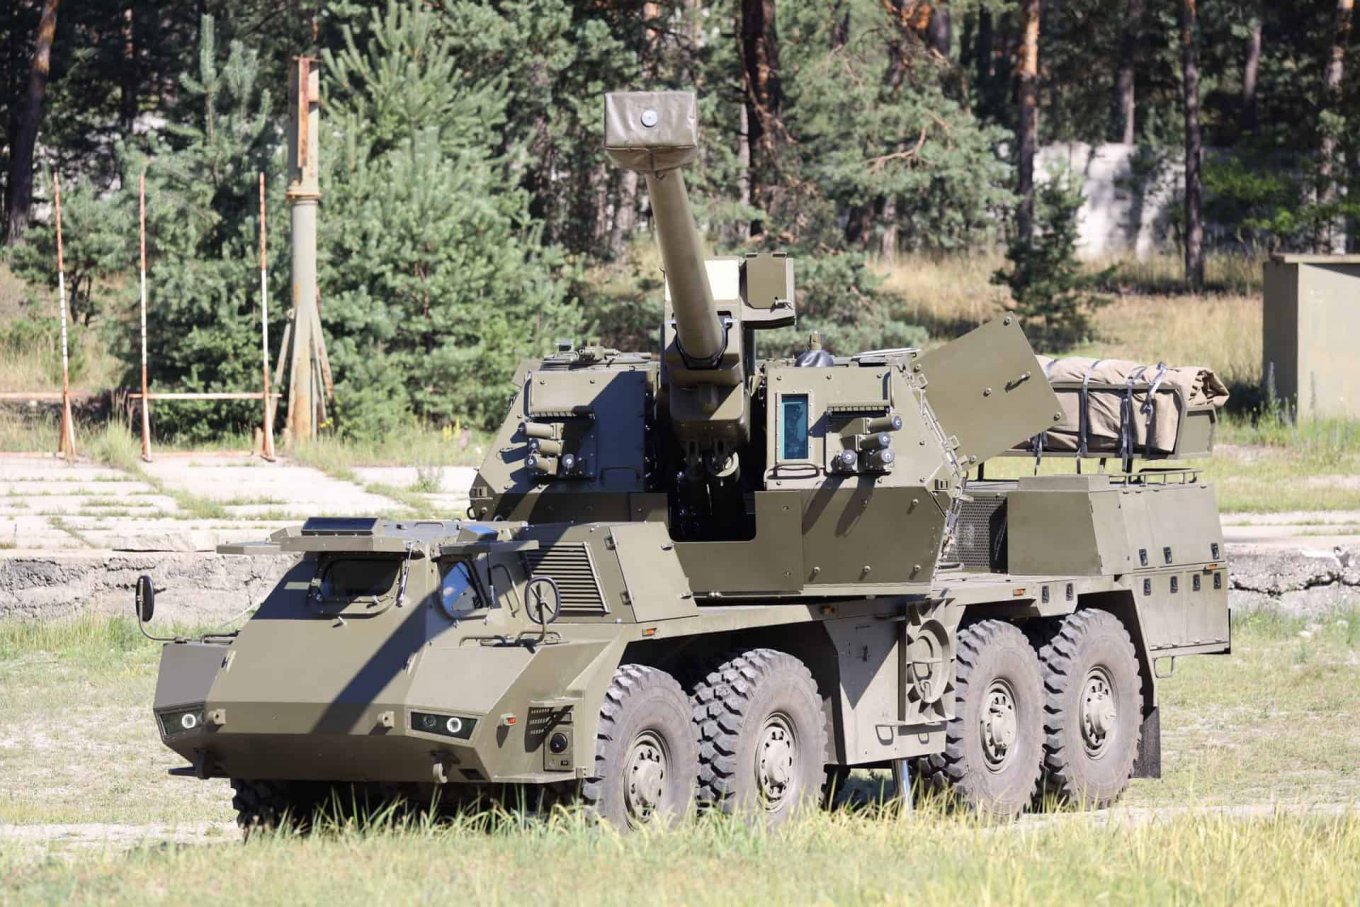 Ukraine received eight Zuzana 2 self-propelled howitzers within the framework of the contract with Slovakia, Defense Express